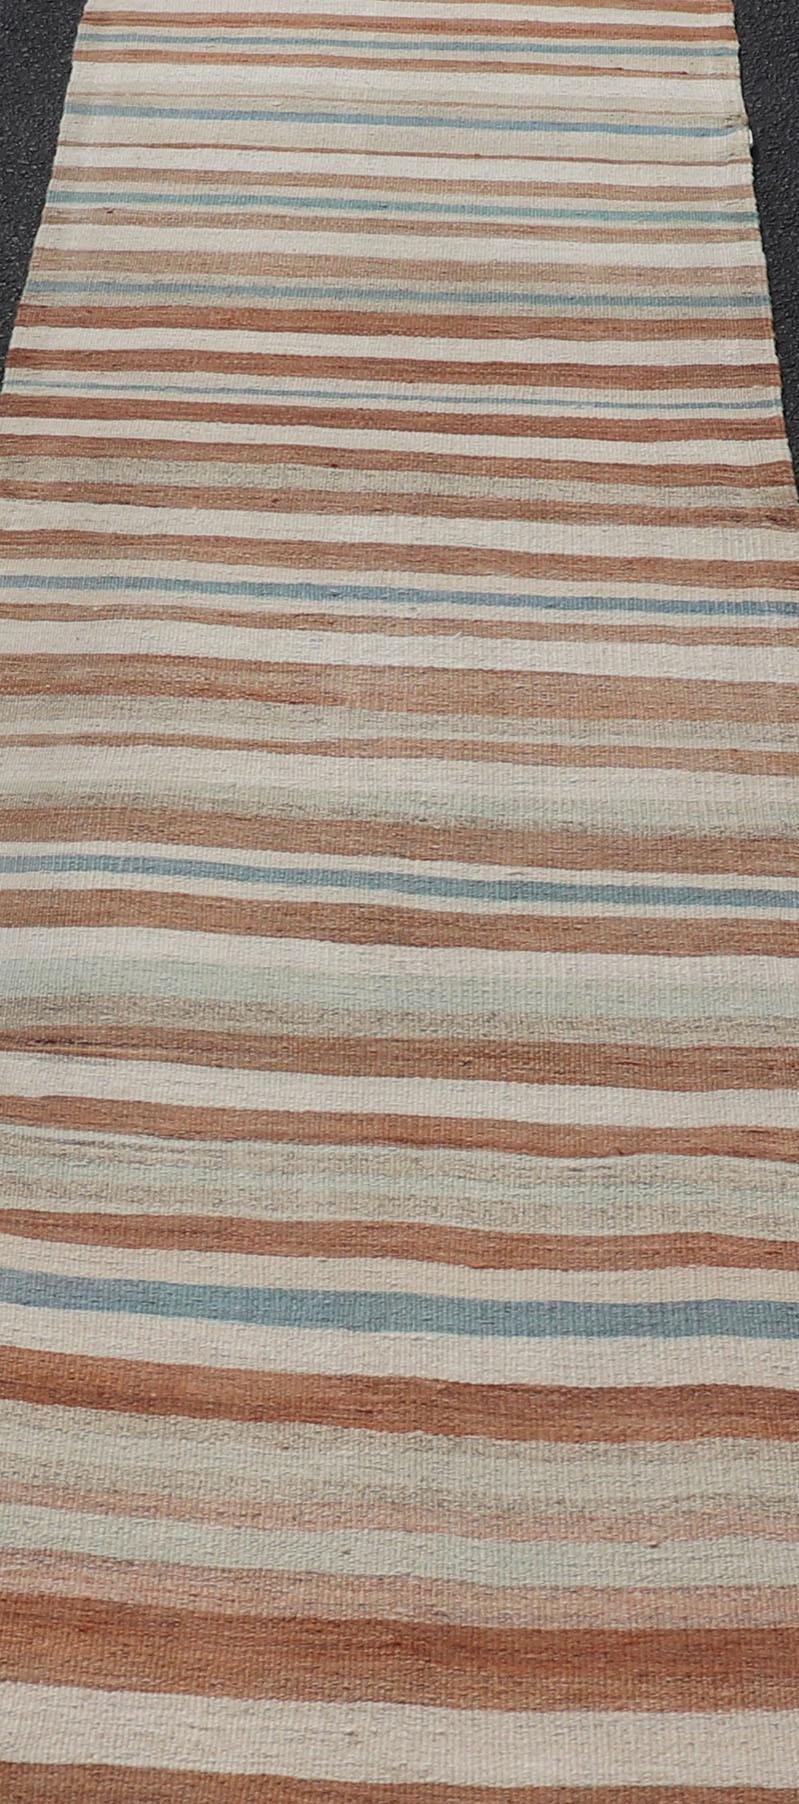 20th Century Striped Vintage Turkish Kilim Runner in Shades of Brown, Cream, and Blue For Sale